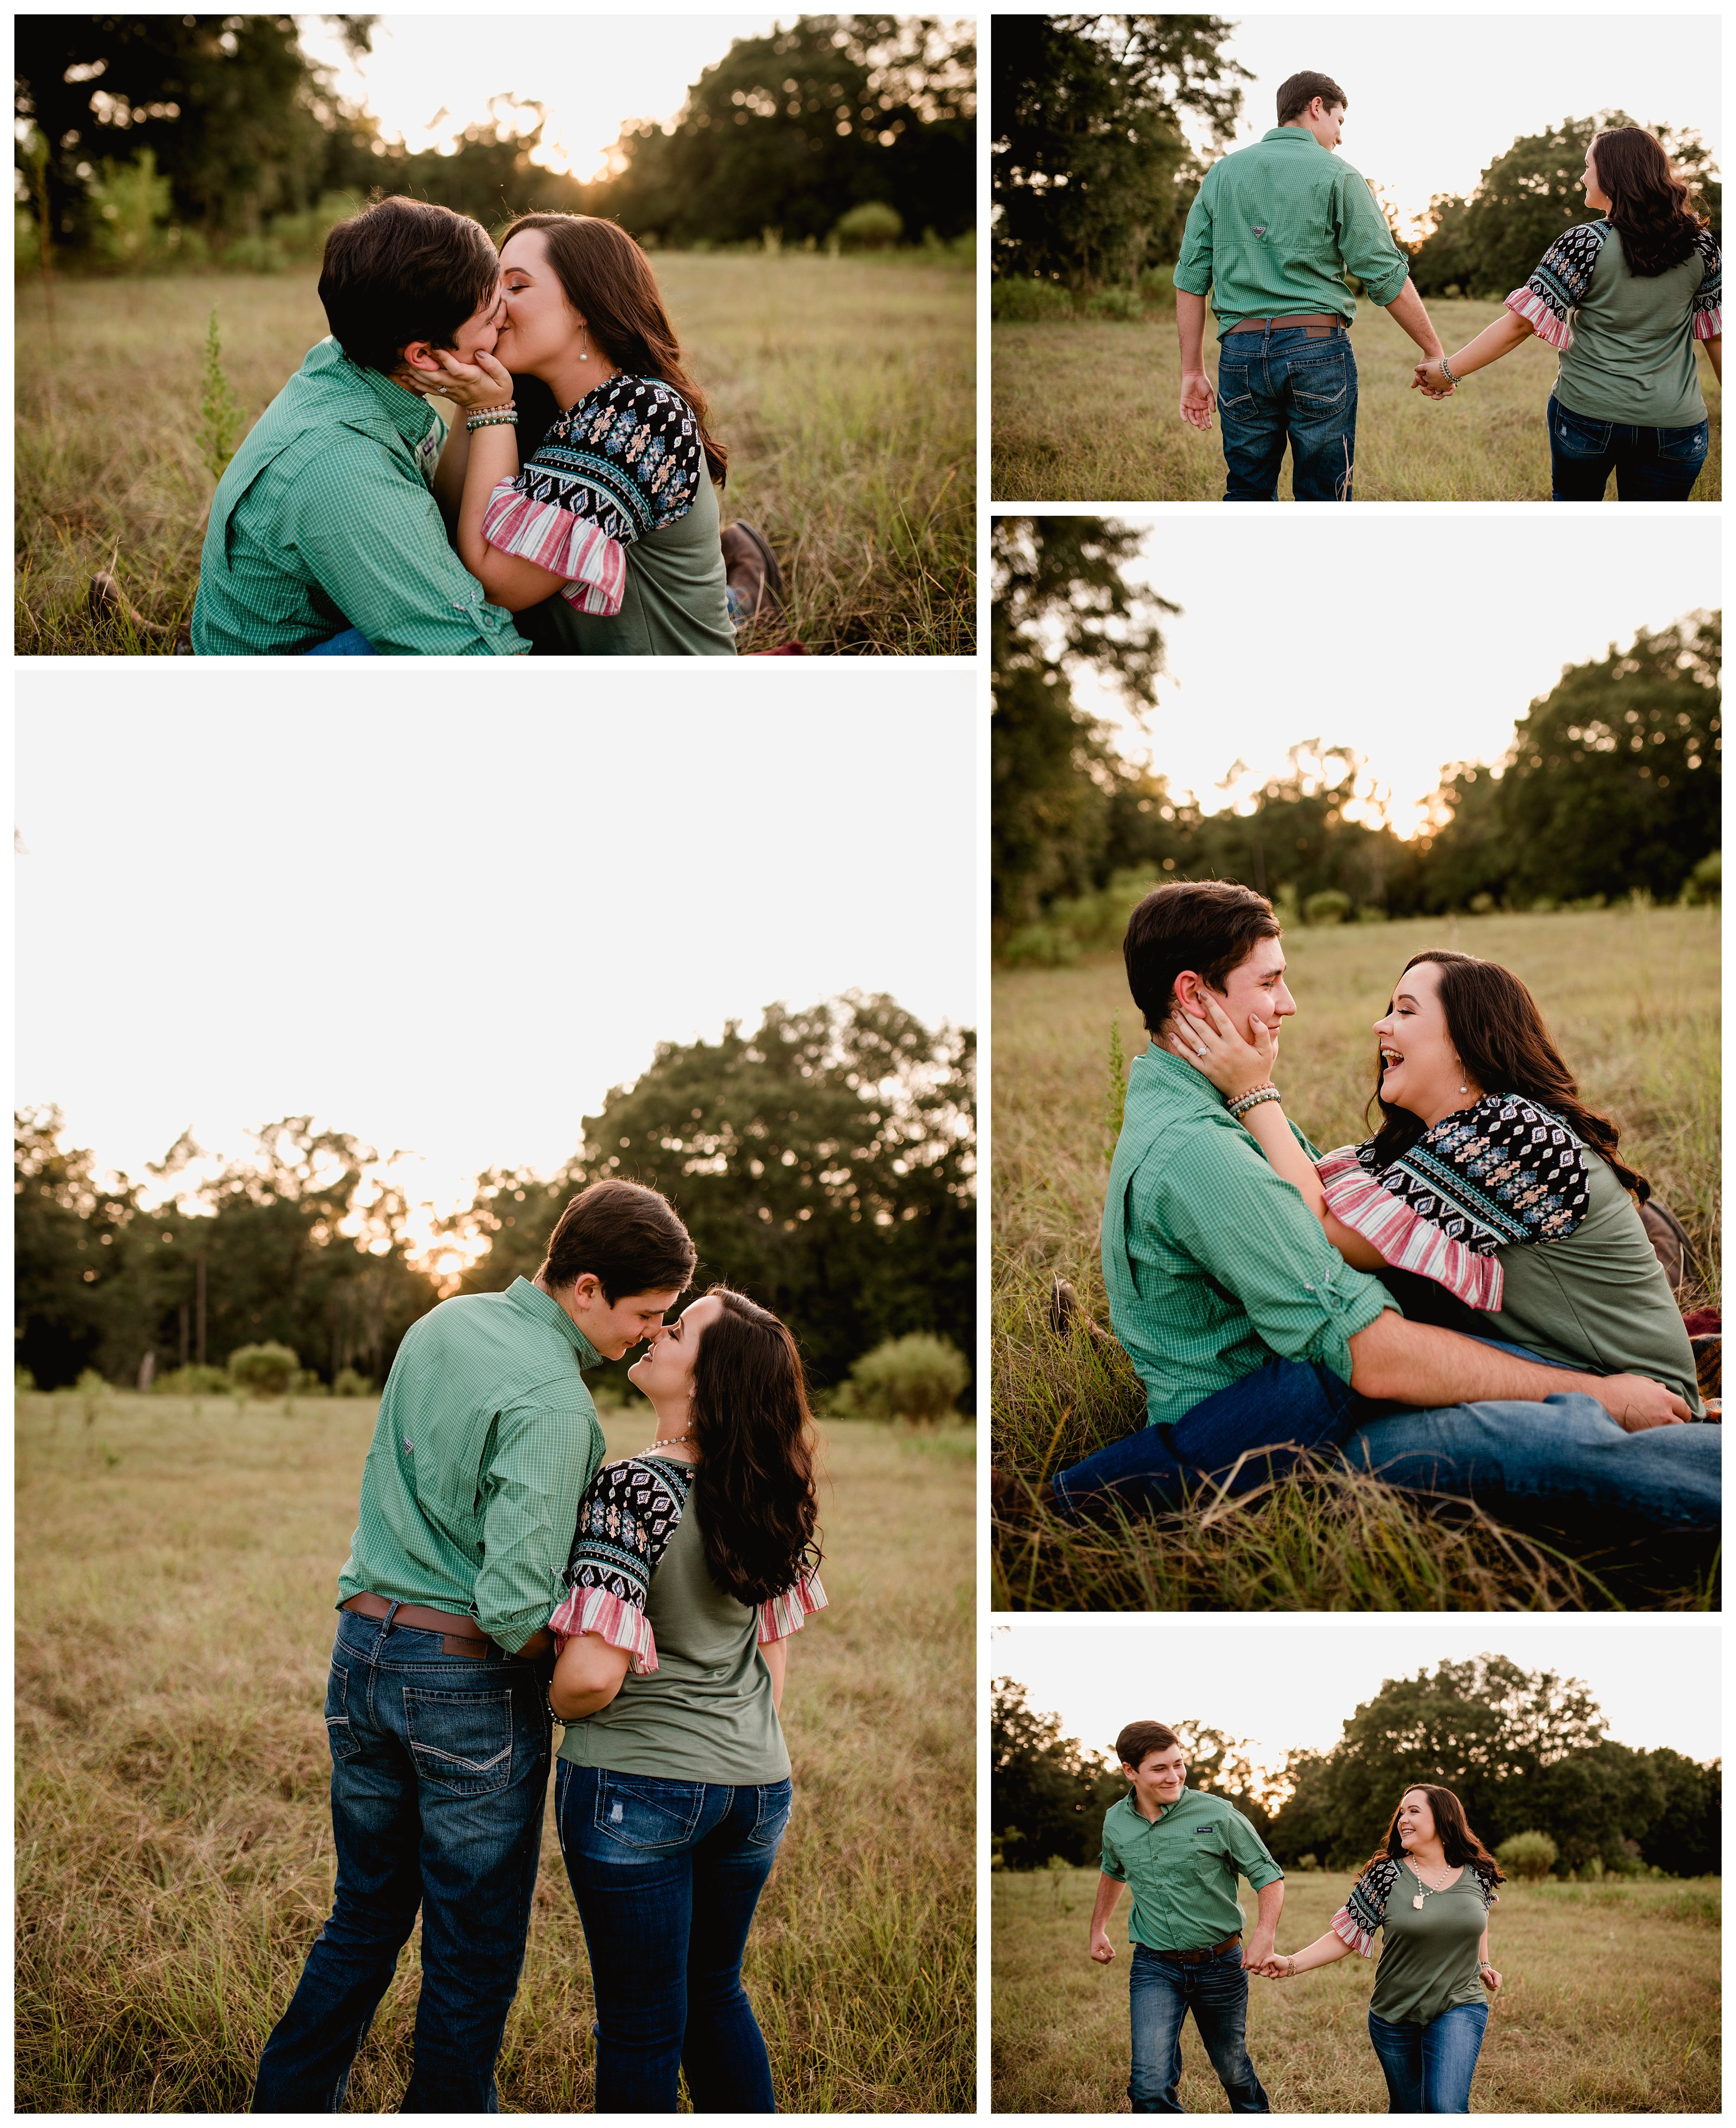 Wedding photographer takes photos of couple for their engagement in a field at sunset.